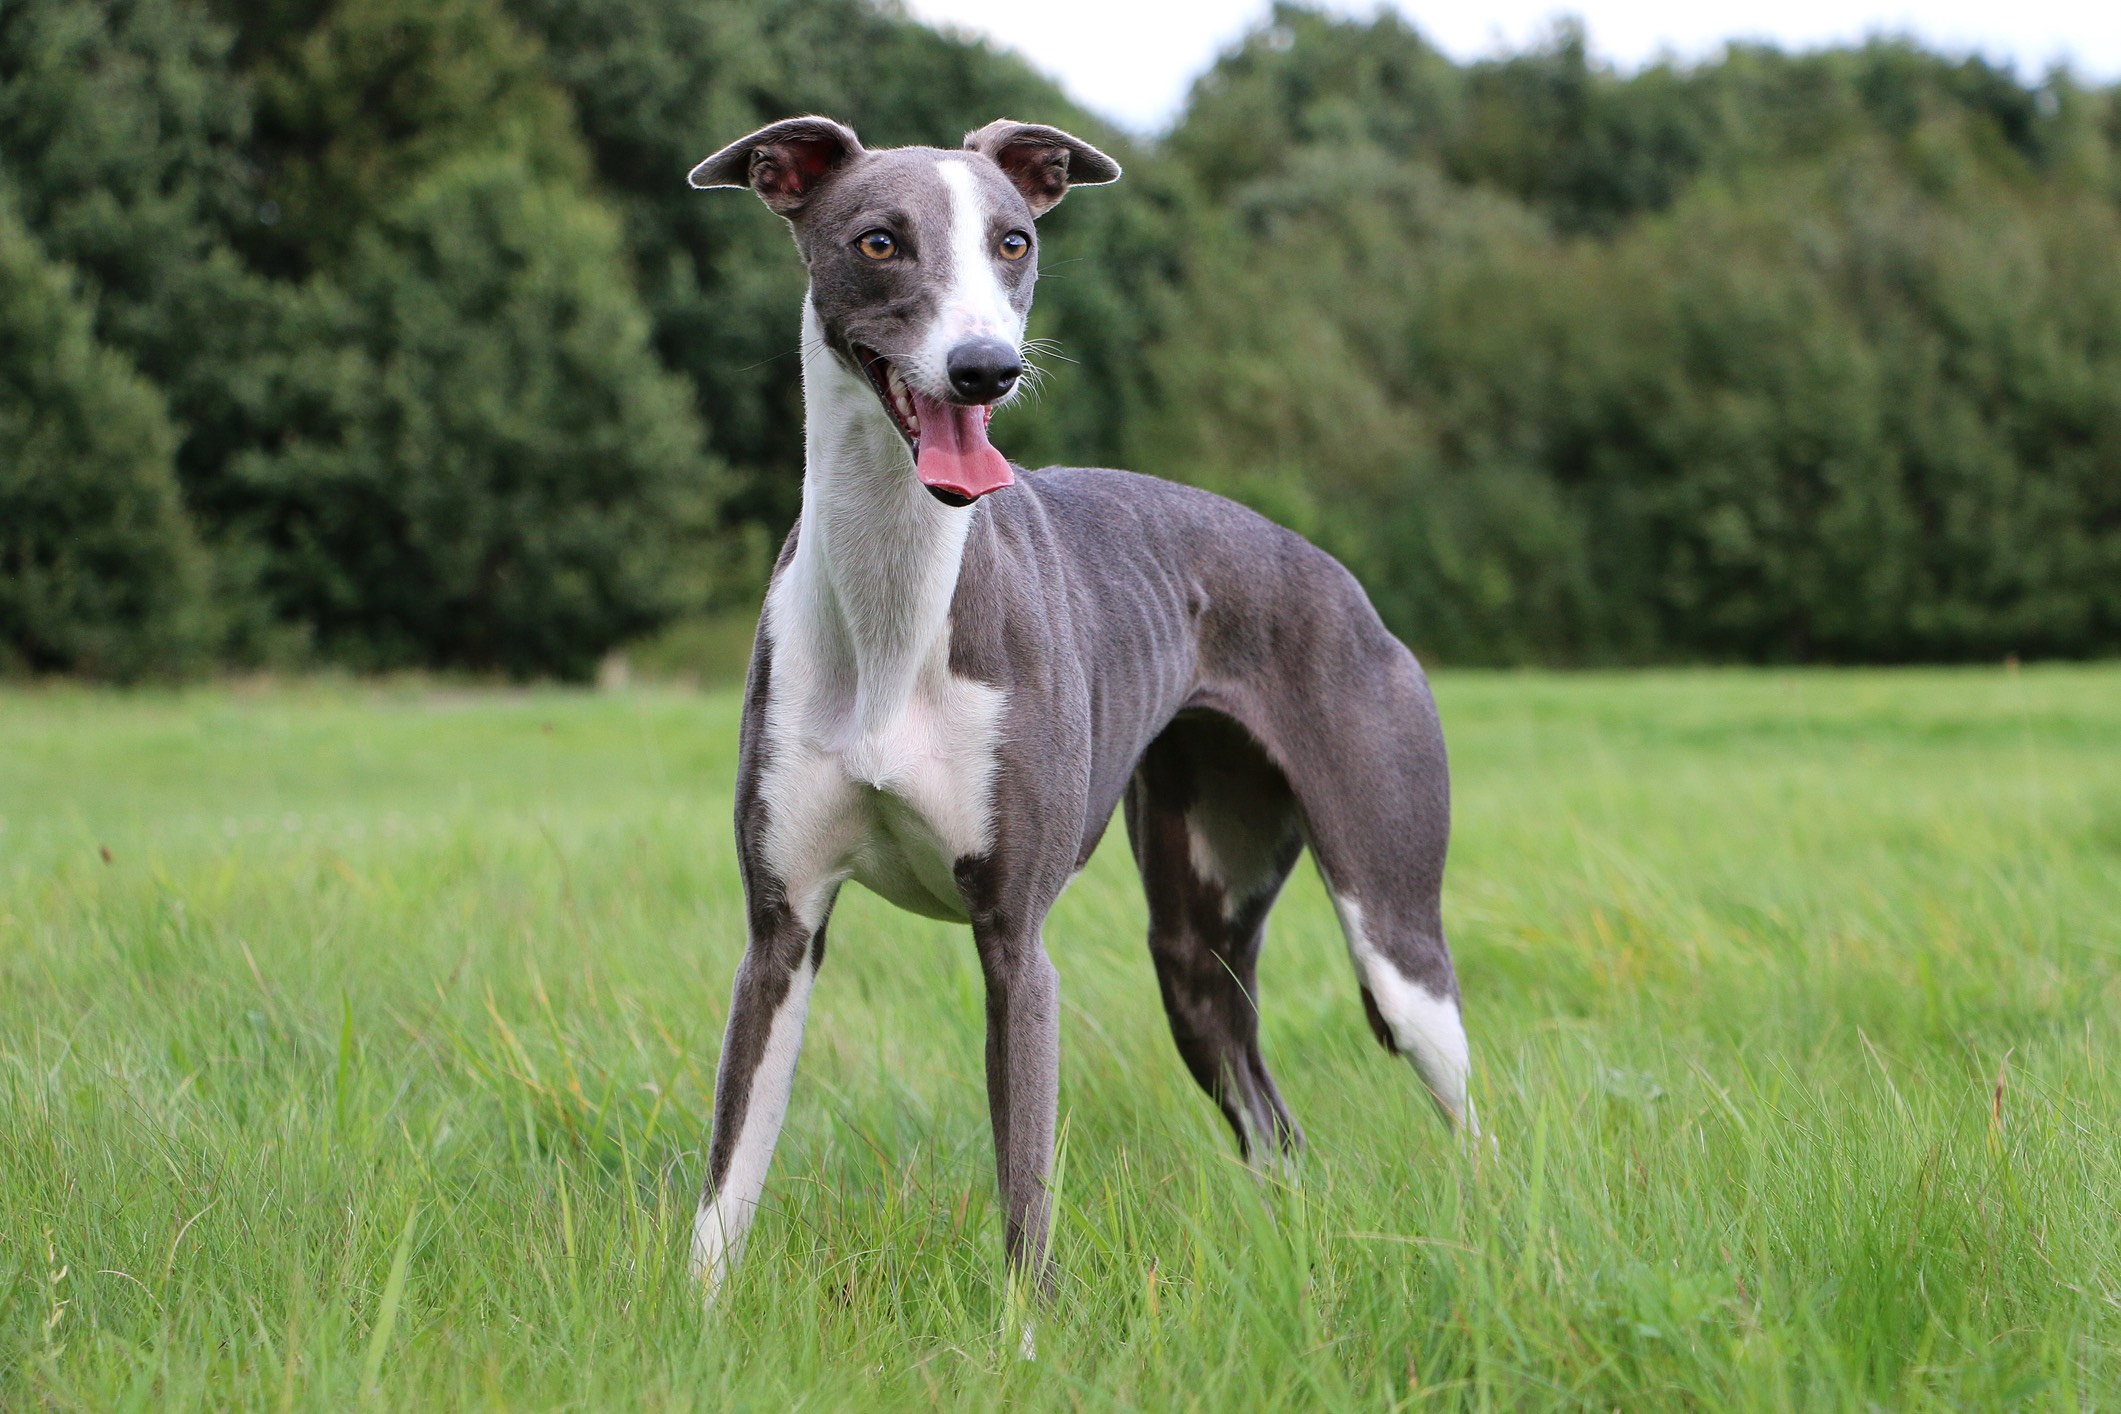 gray and white whippet standing in grass